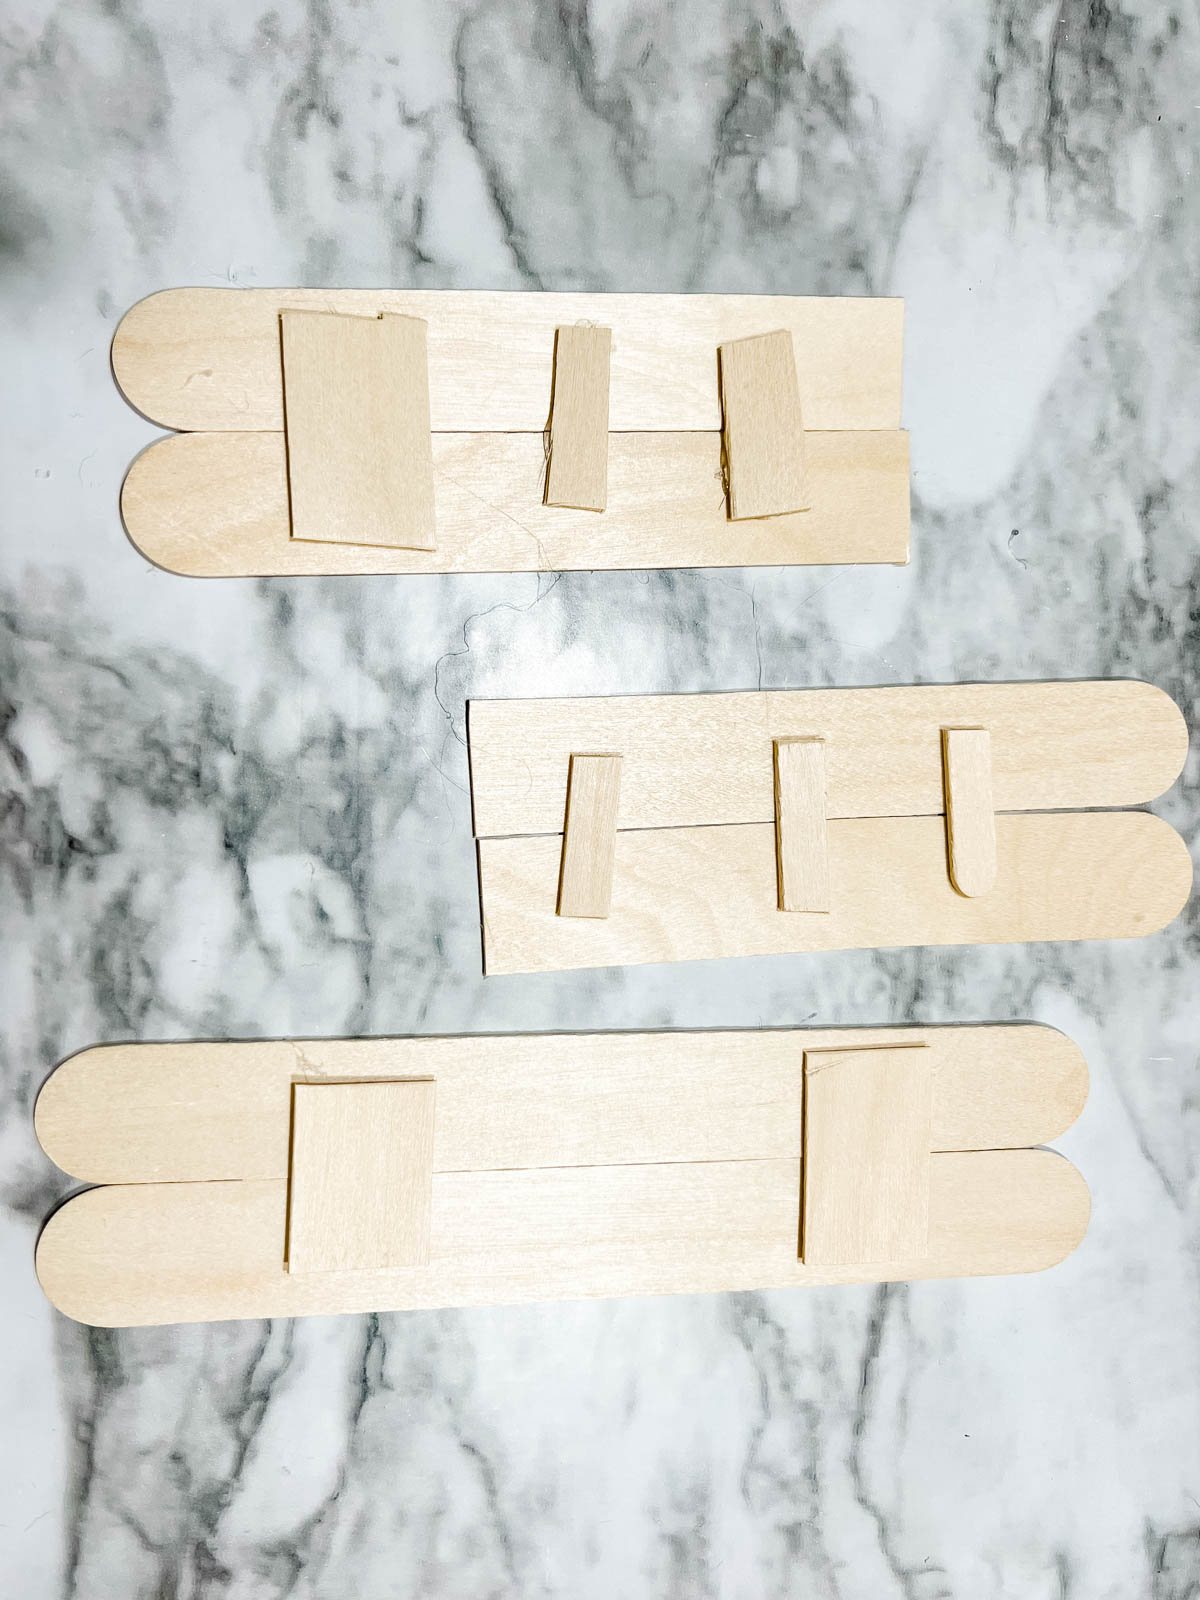 Large wooden craft sticks glued together side by side by using smaller pieces of craft sticks on top to secure.